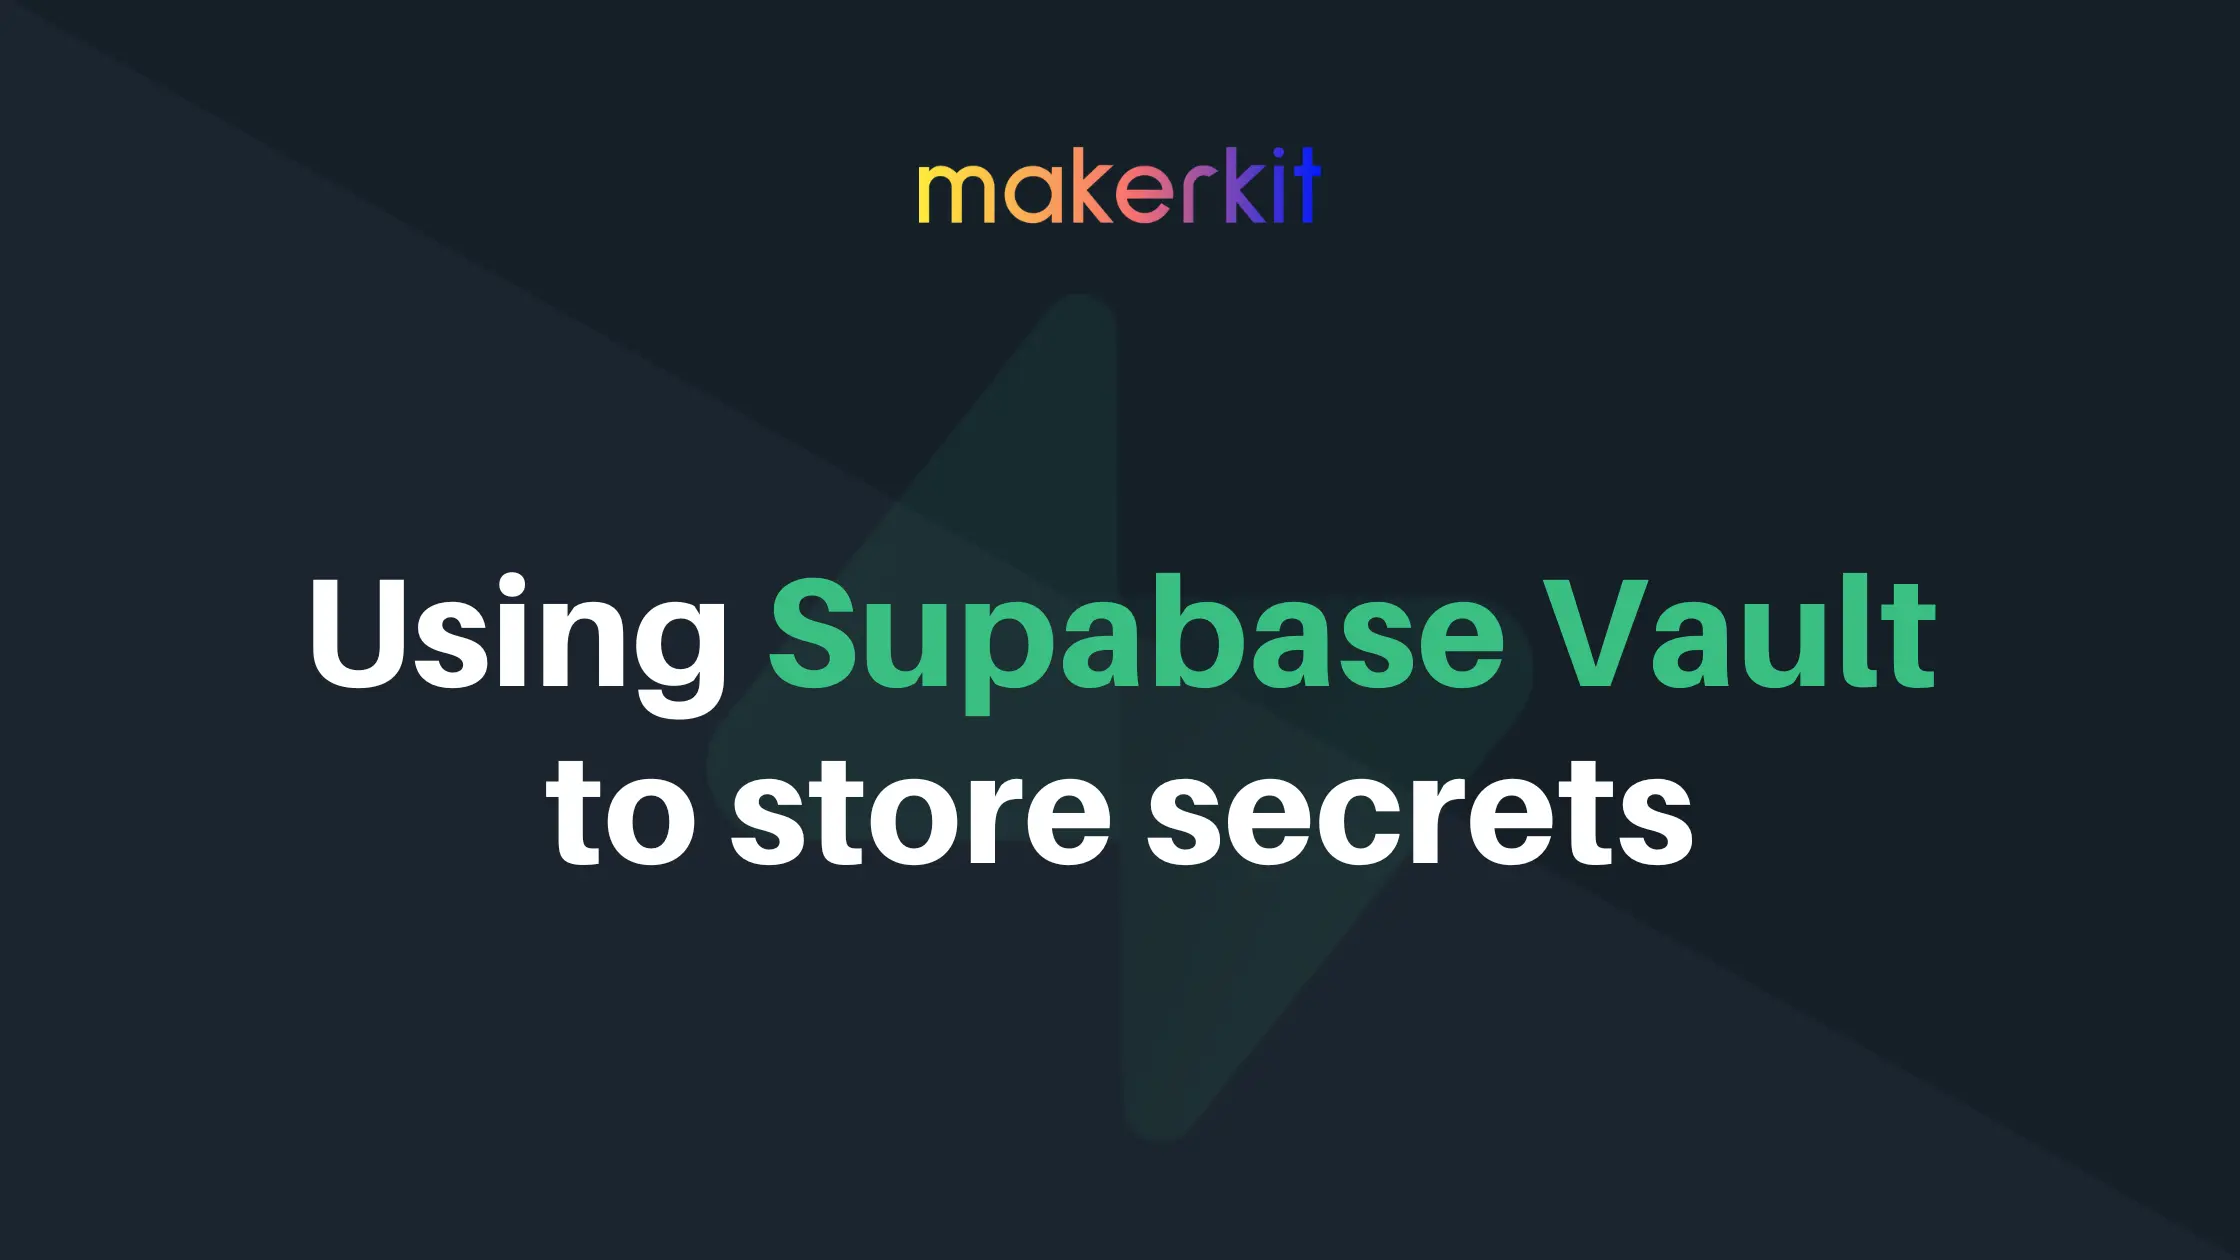 Cover Image for Using Supabase Vault to store secrets